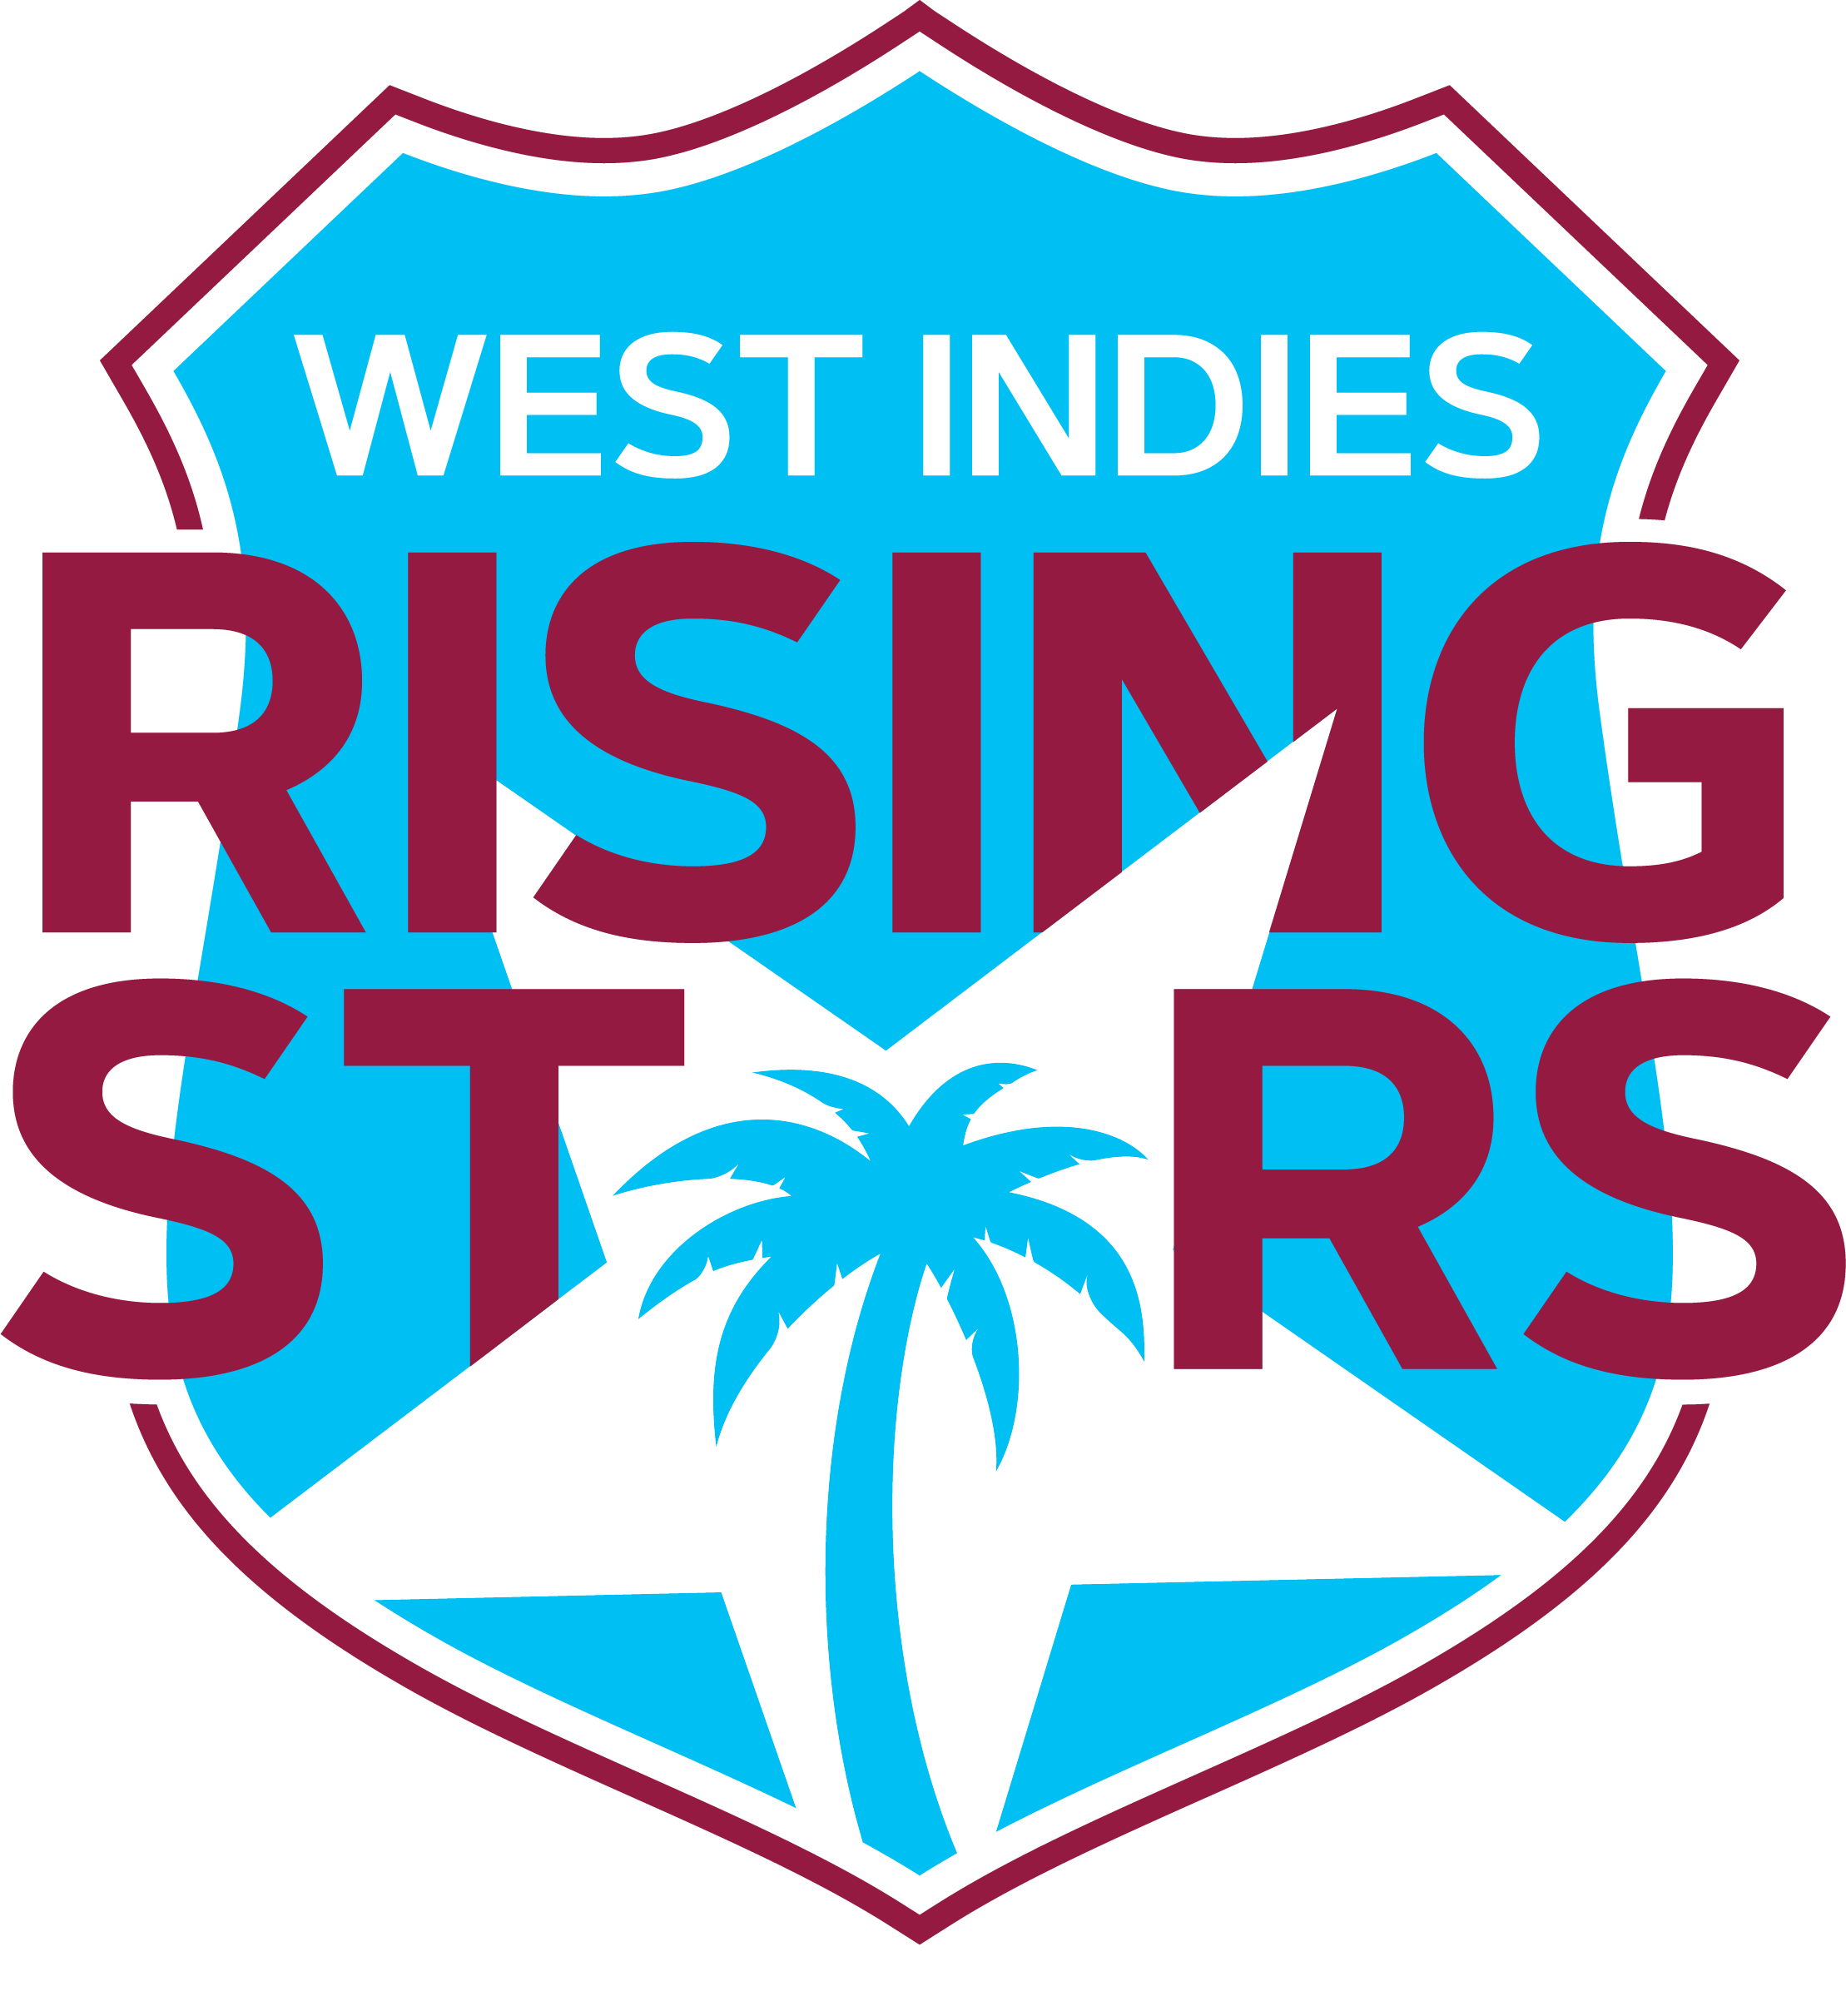 26 players selected for West Indies Rising Stars U19s High Performance Camp